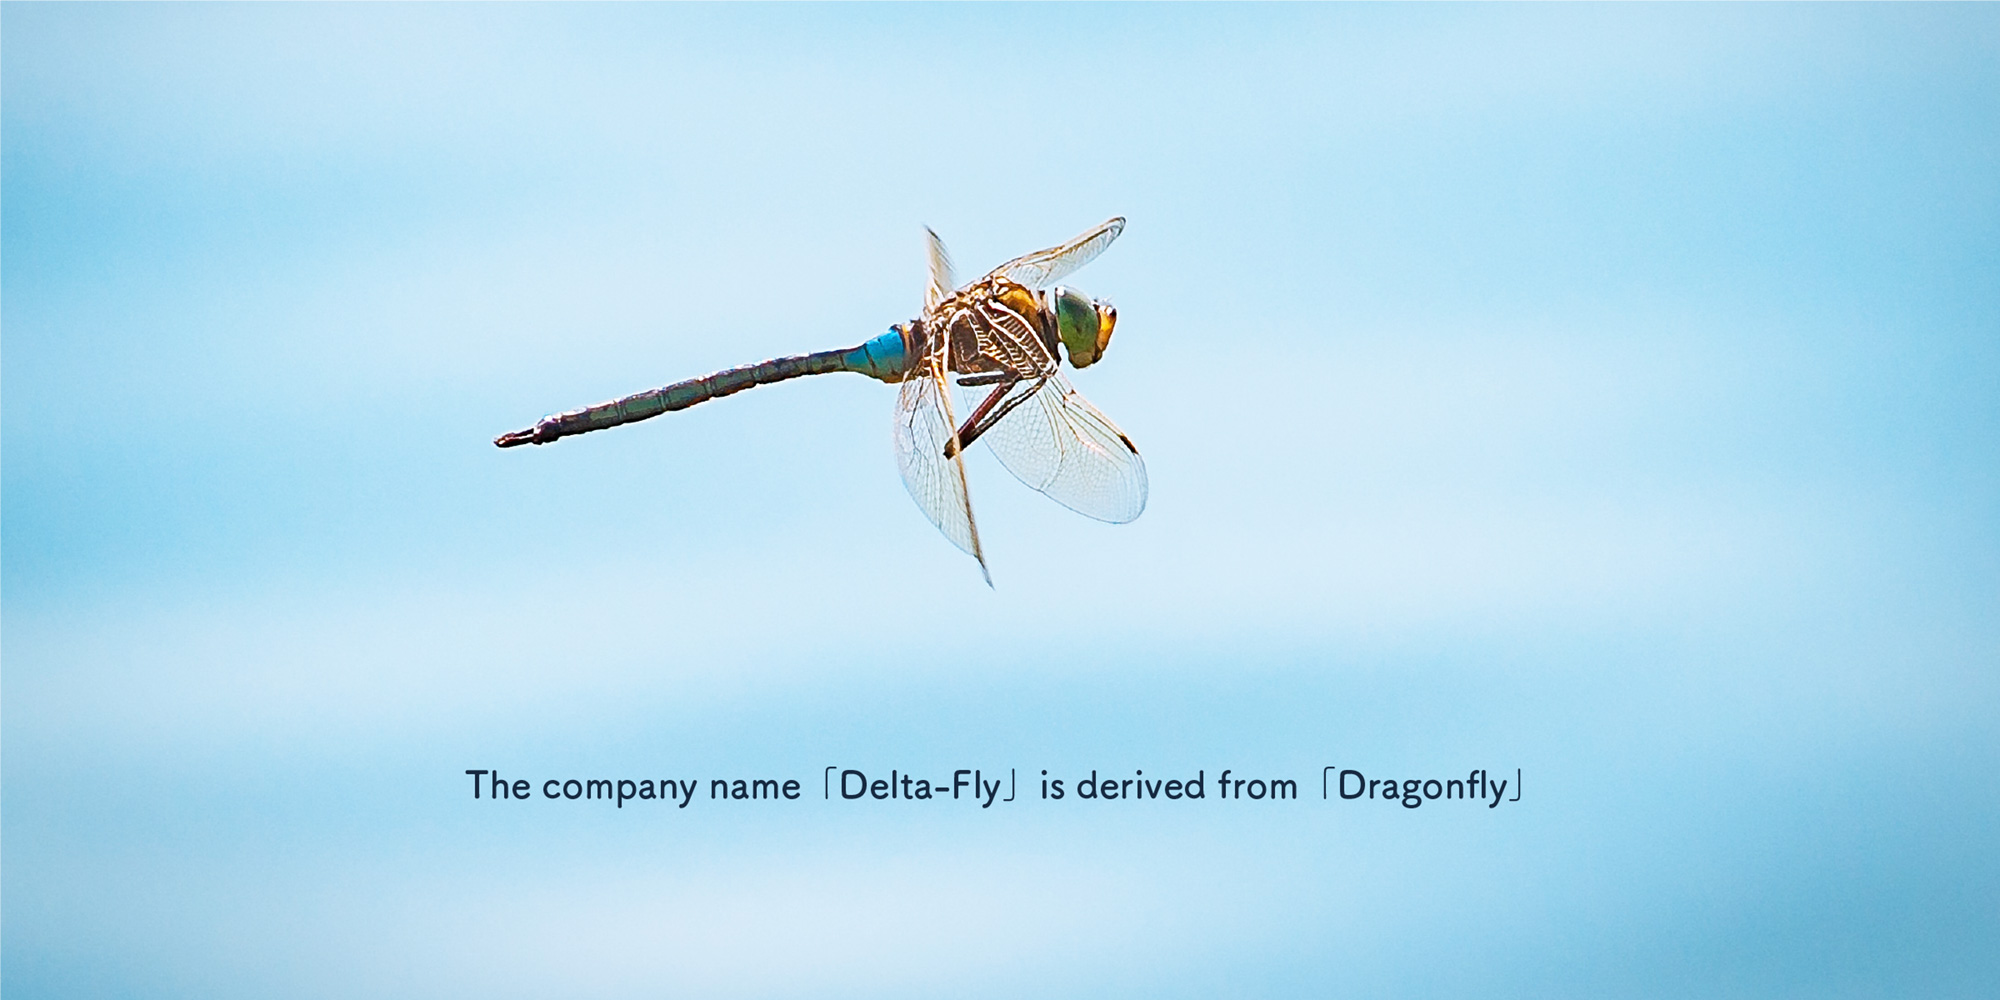 The company name 「Delta-Fly」 is derived from 「Dragonfly」